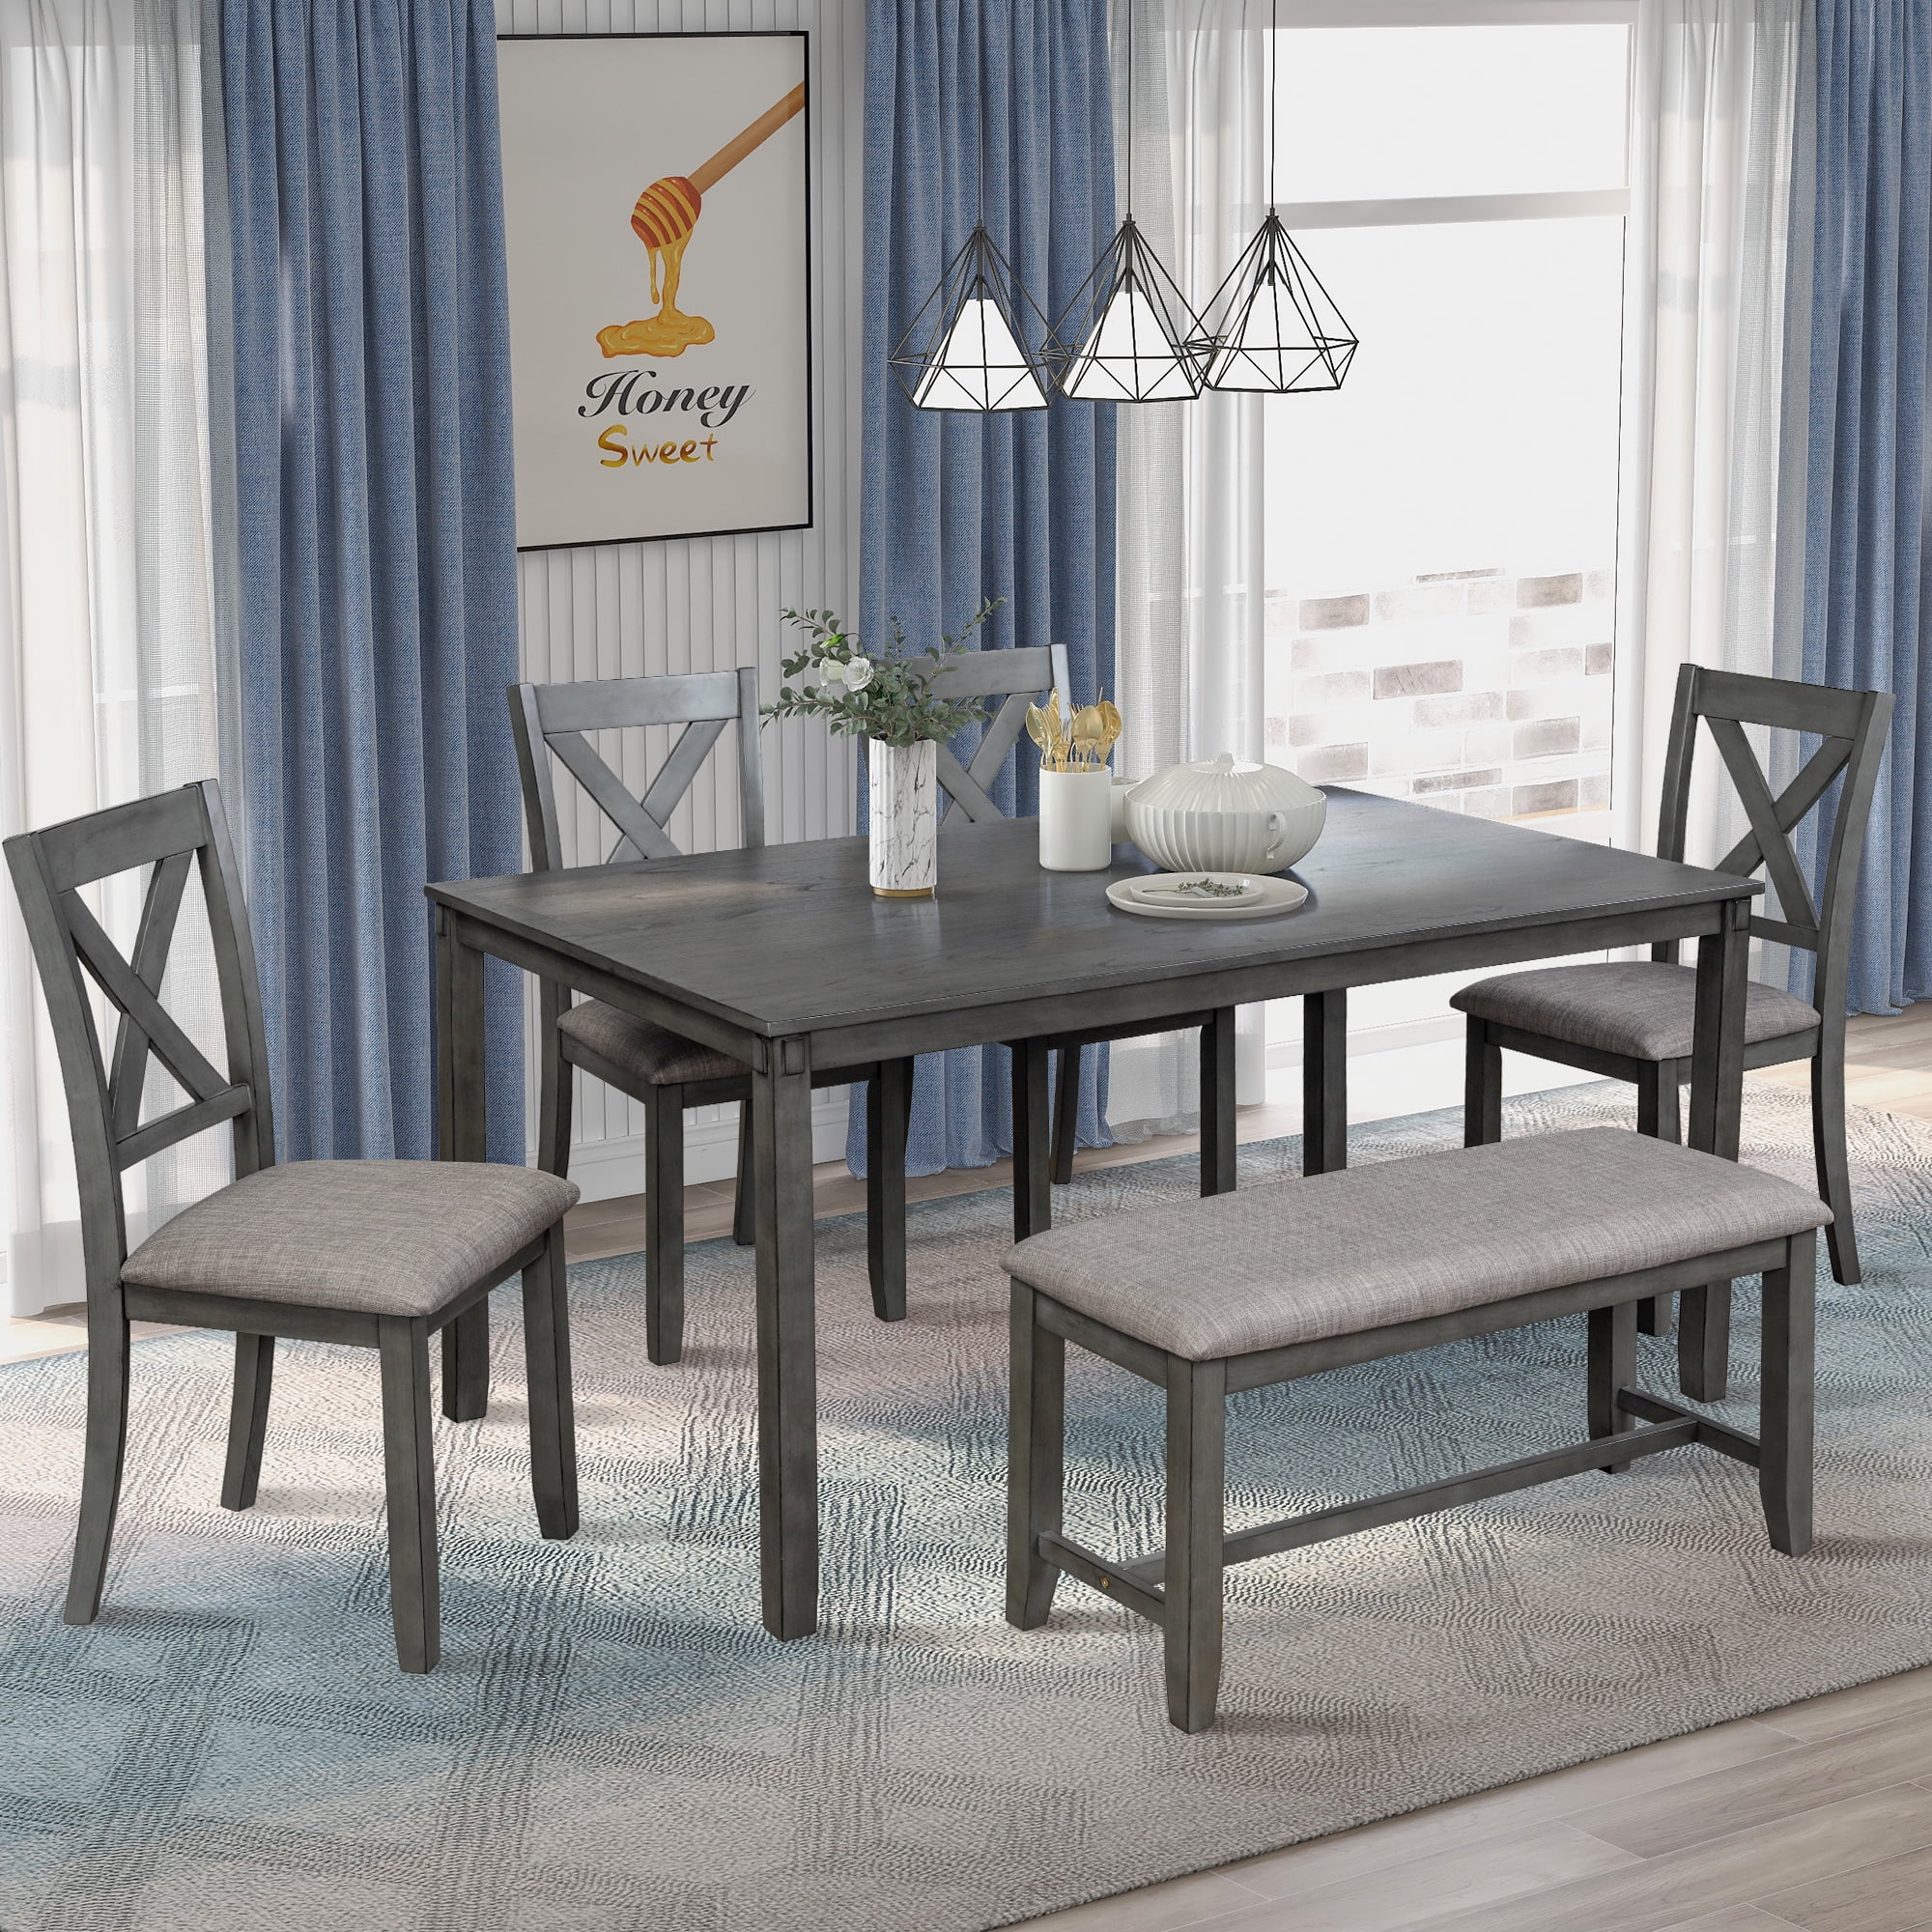 6 Piece Dining Table Set Modern Home, Dining Table With 6 Chairs Set